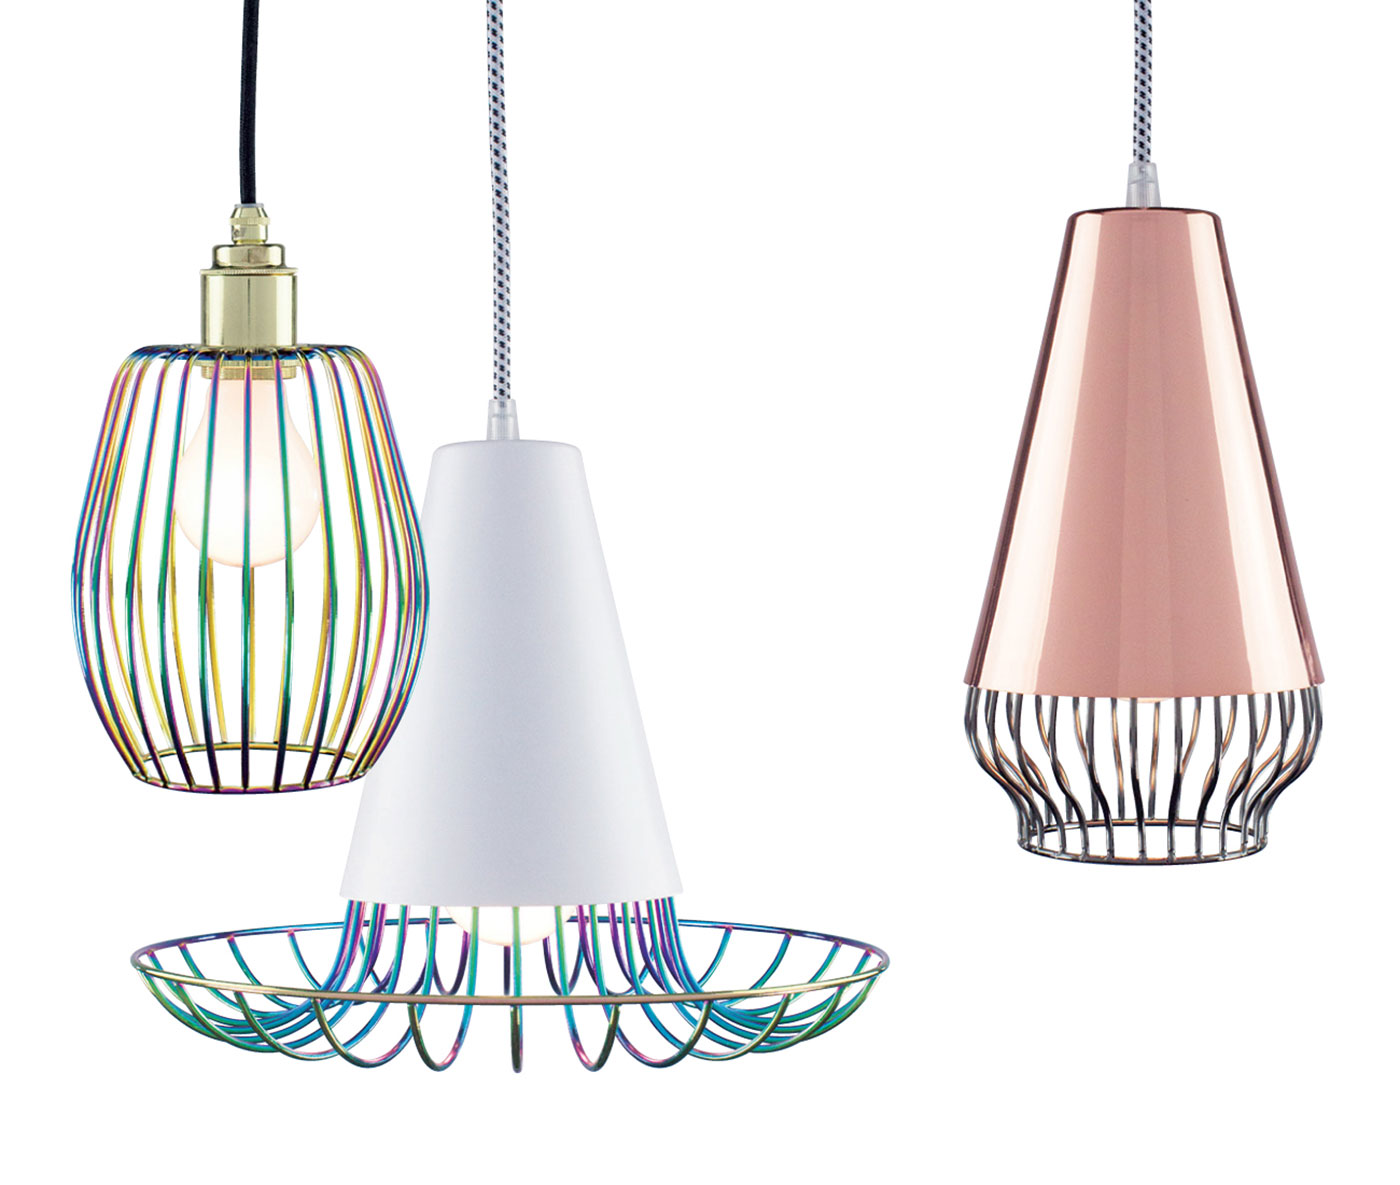 Rob Southcott and Sarah Cooper’s Shelter Bay offers pendant lights